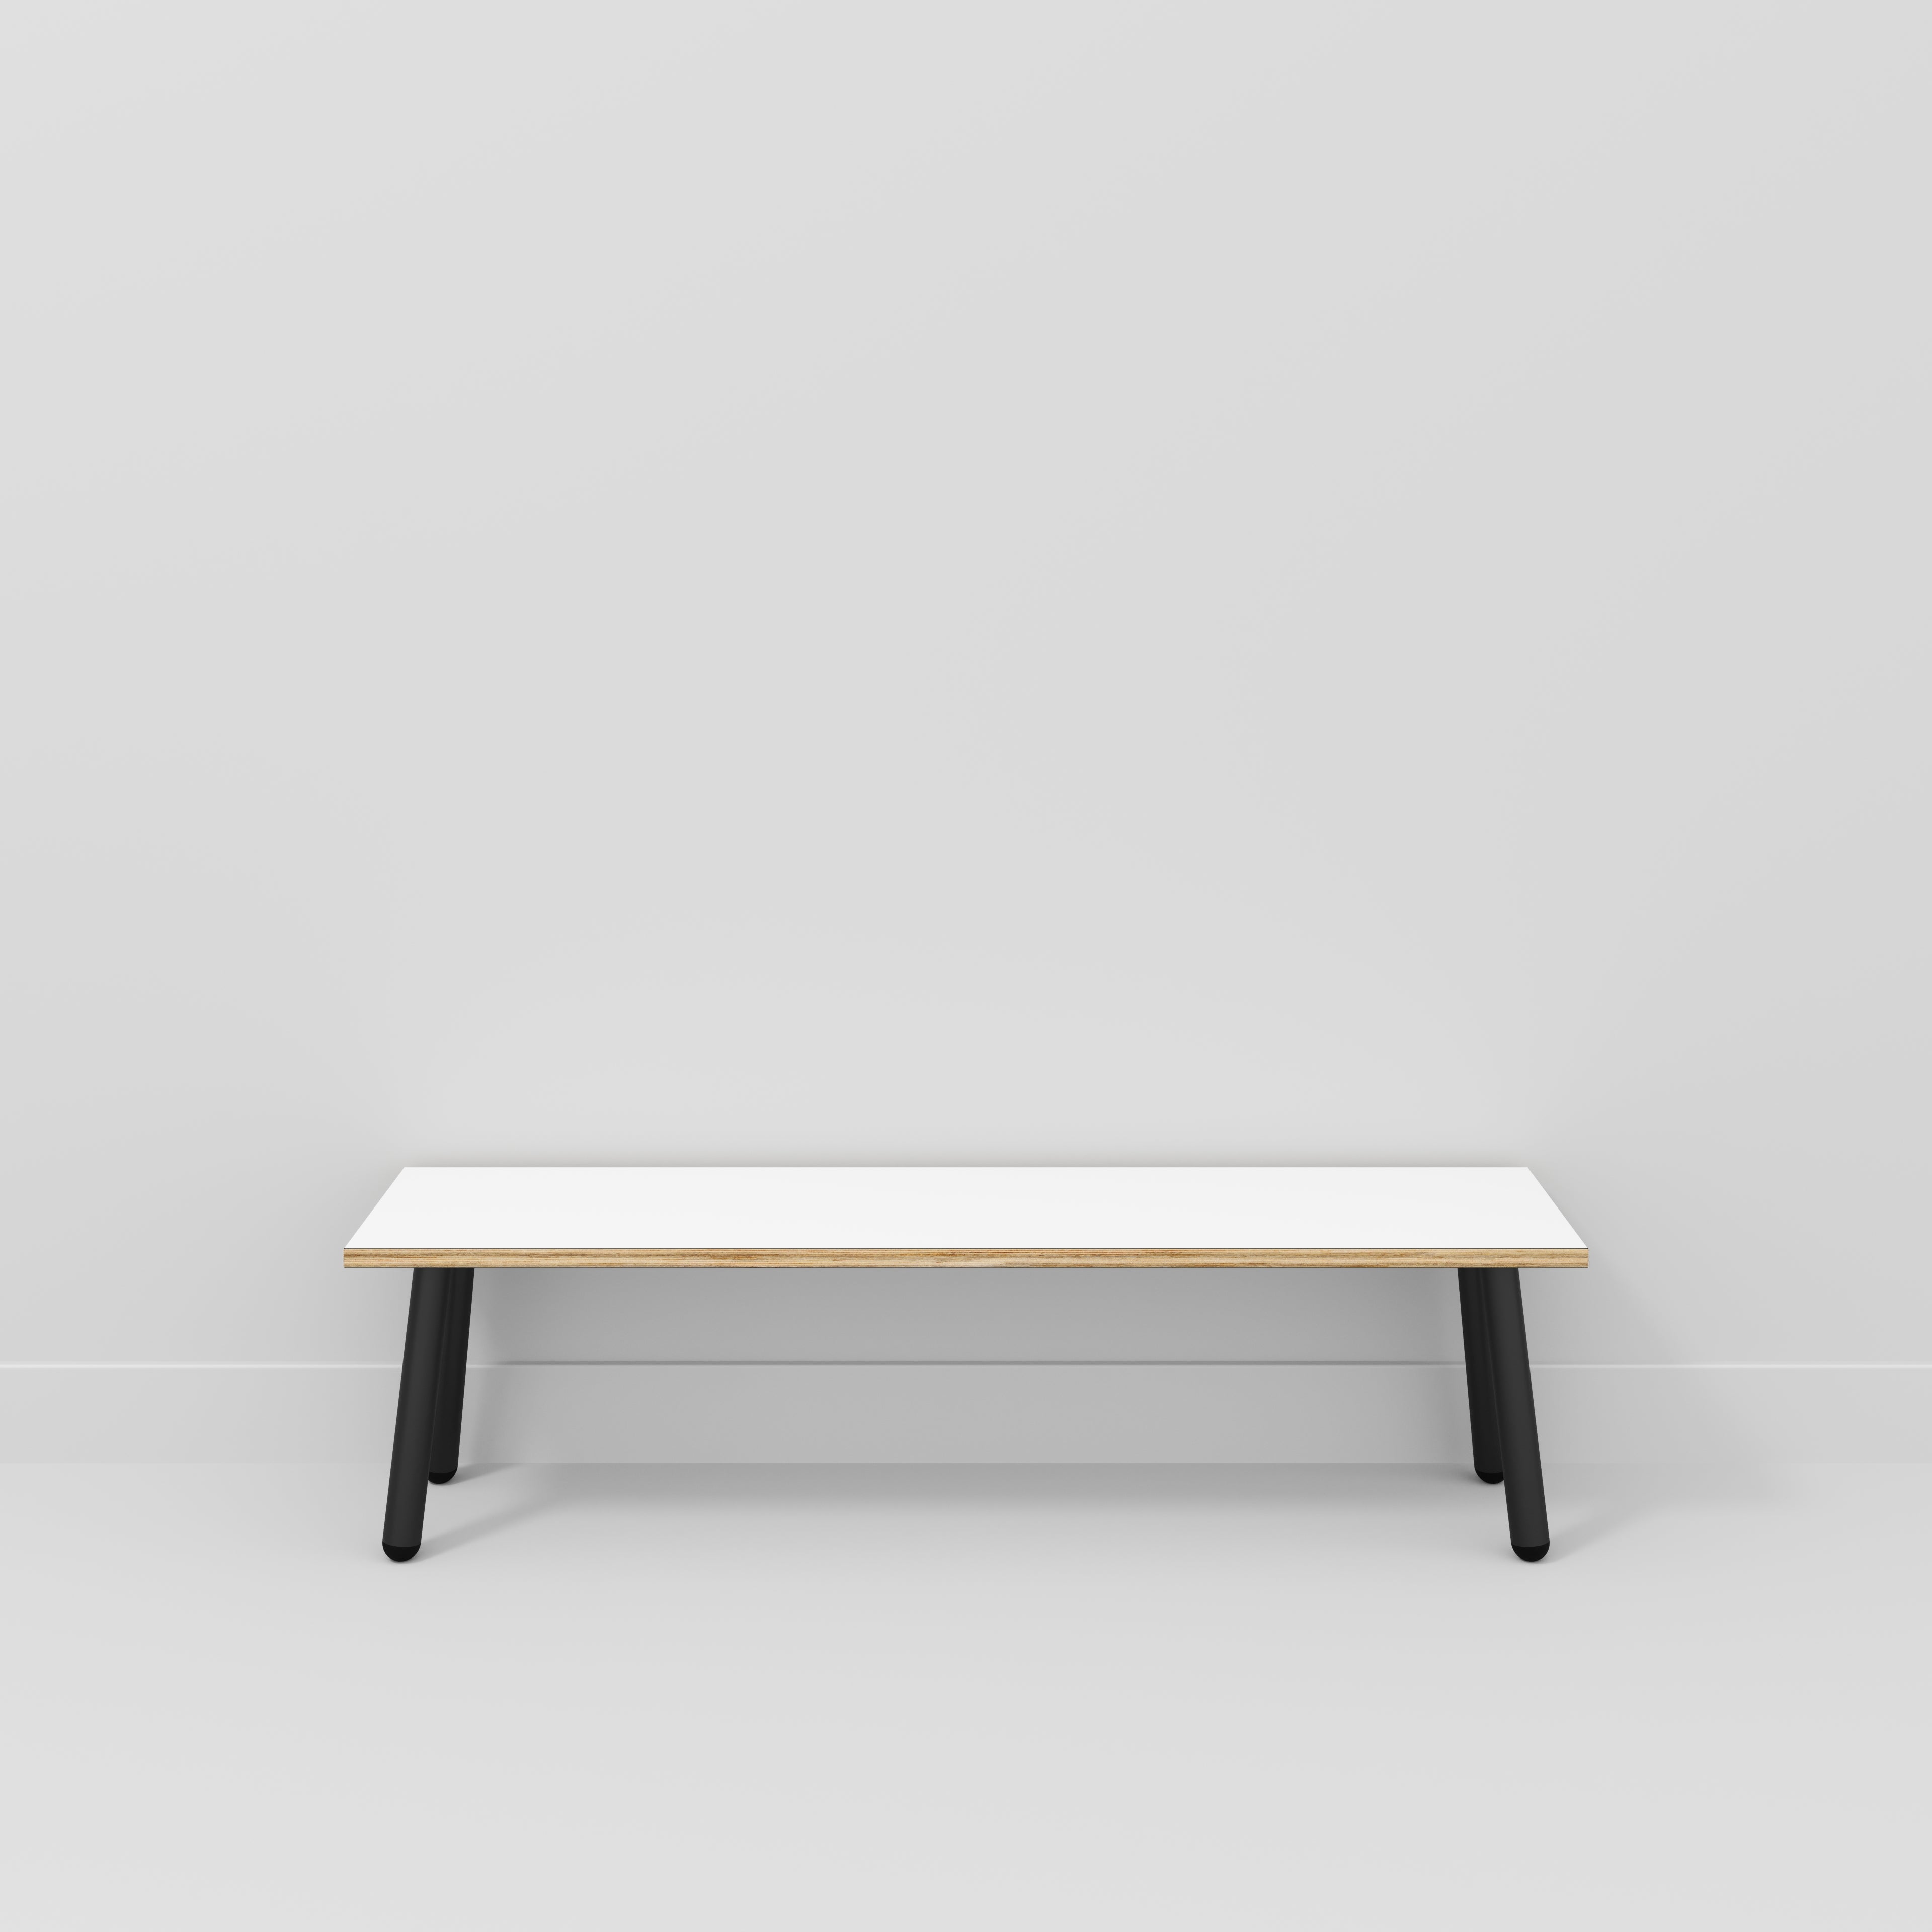 Bench Seat with Black Round Single Pin Legs - Formica White - 1600(w) x 400(d)